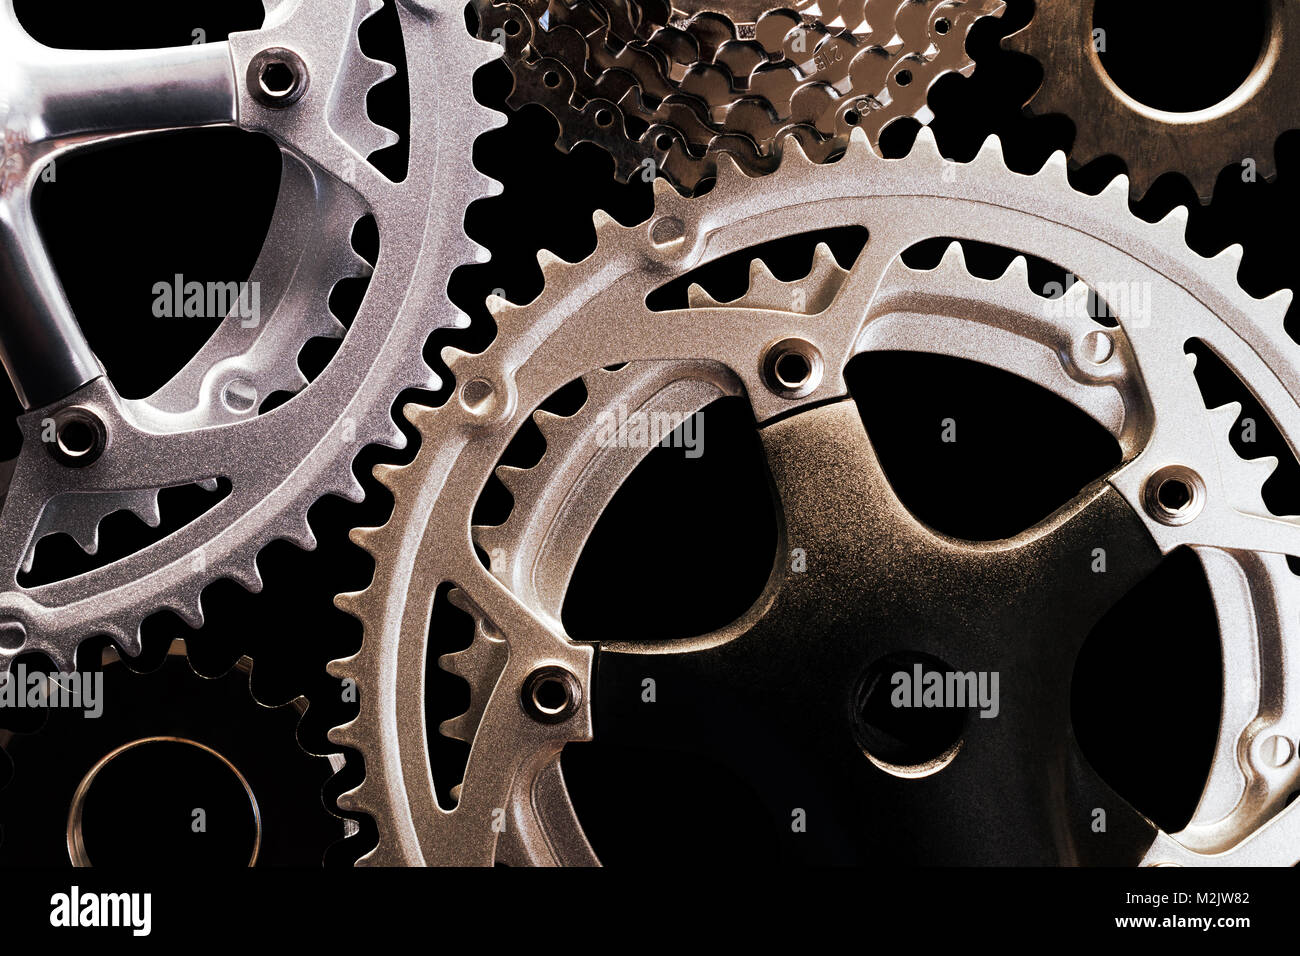 Close-up of various types of bicycle gears on black background Stock Photo